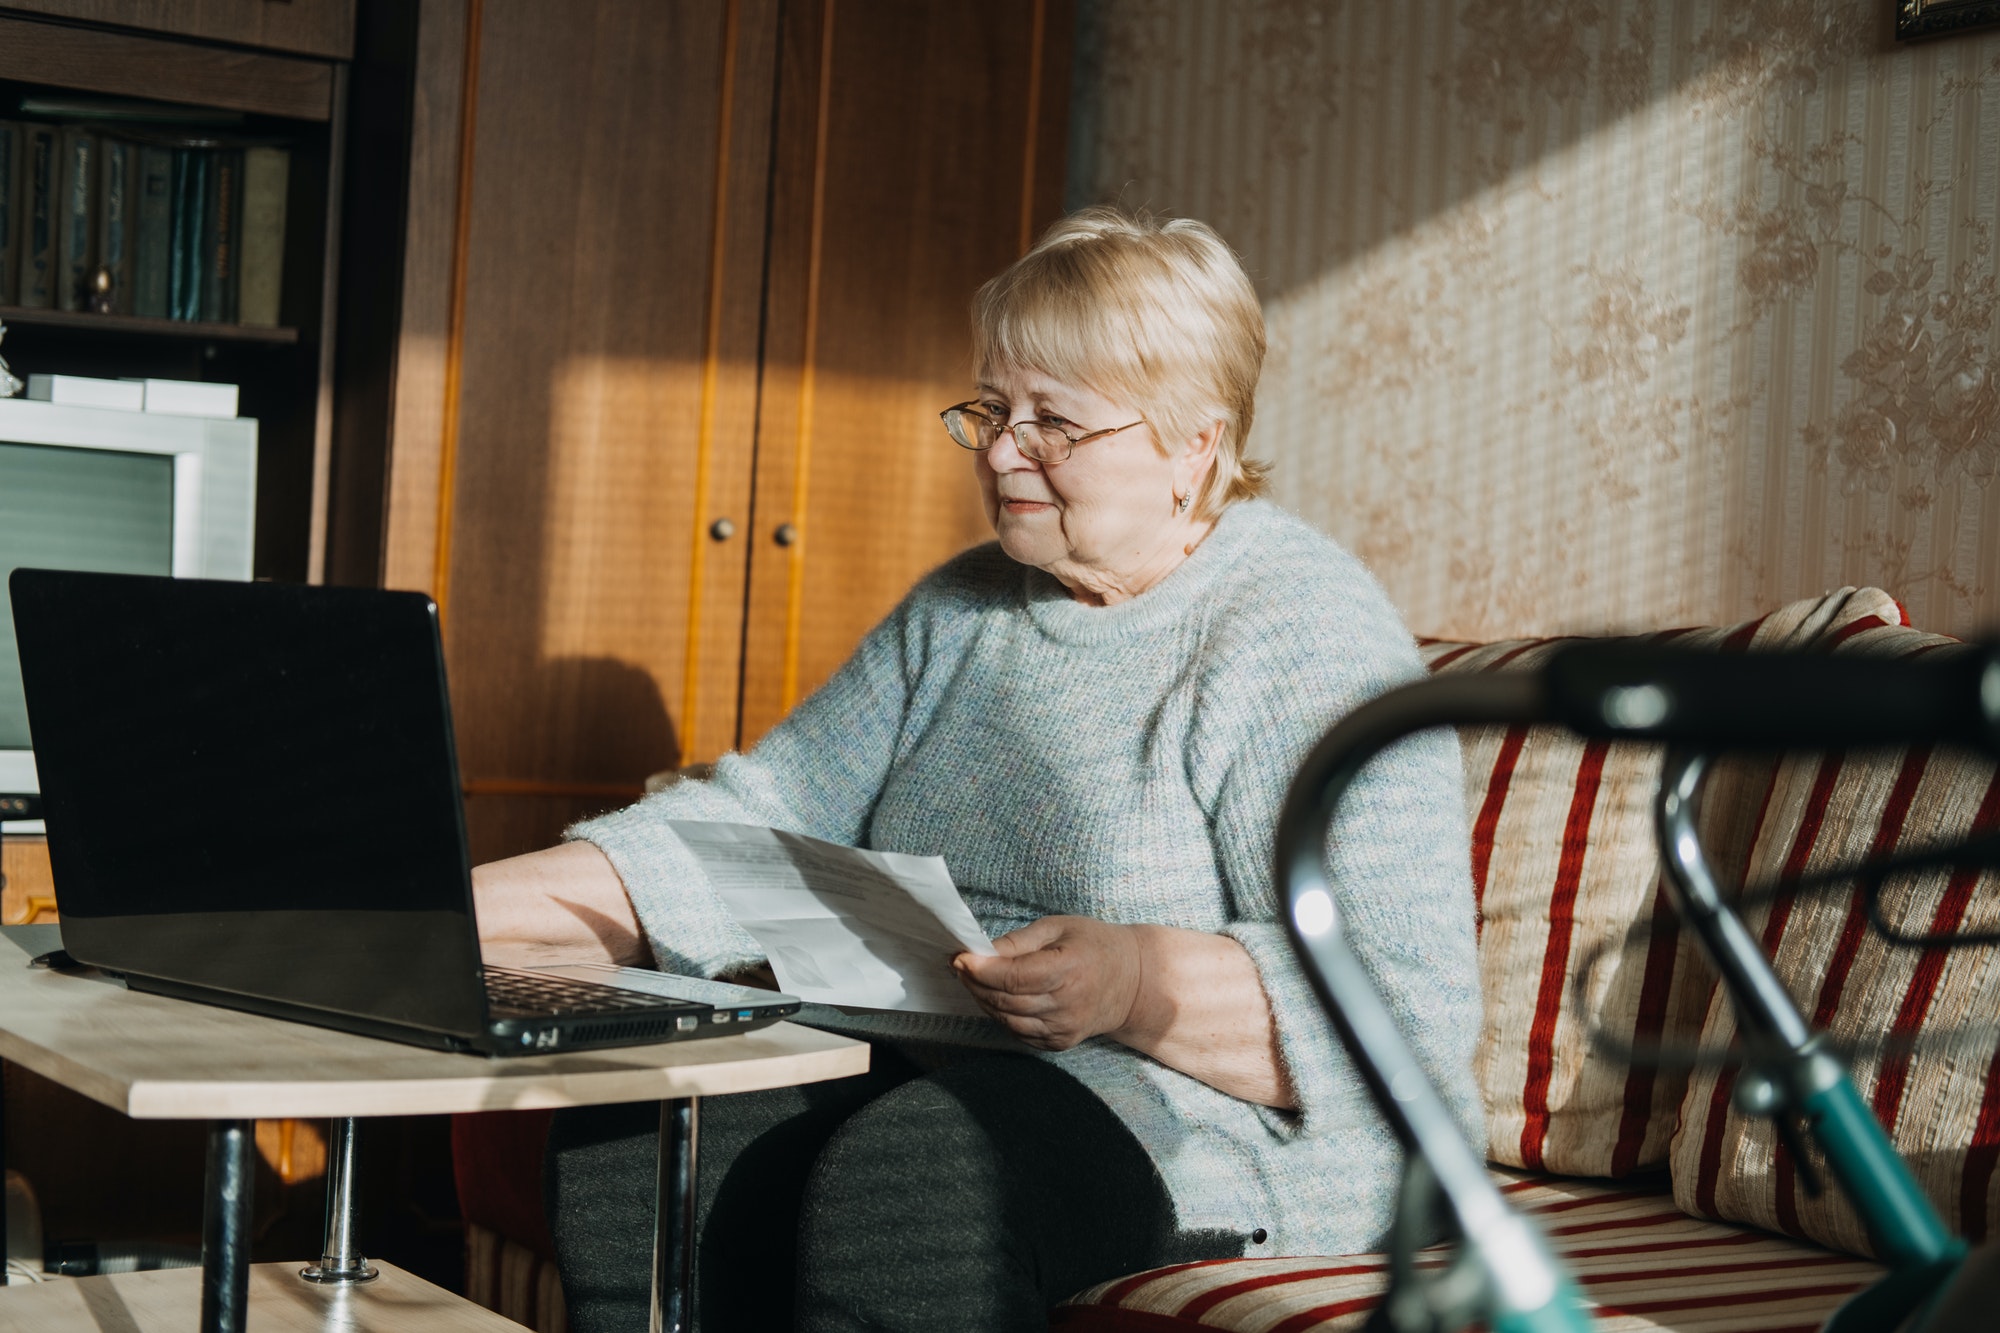 Life Insurance, Disability medical insurance policy for Seniors. Mature woman in glasses with Laptop